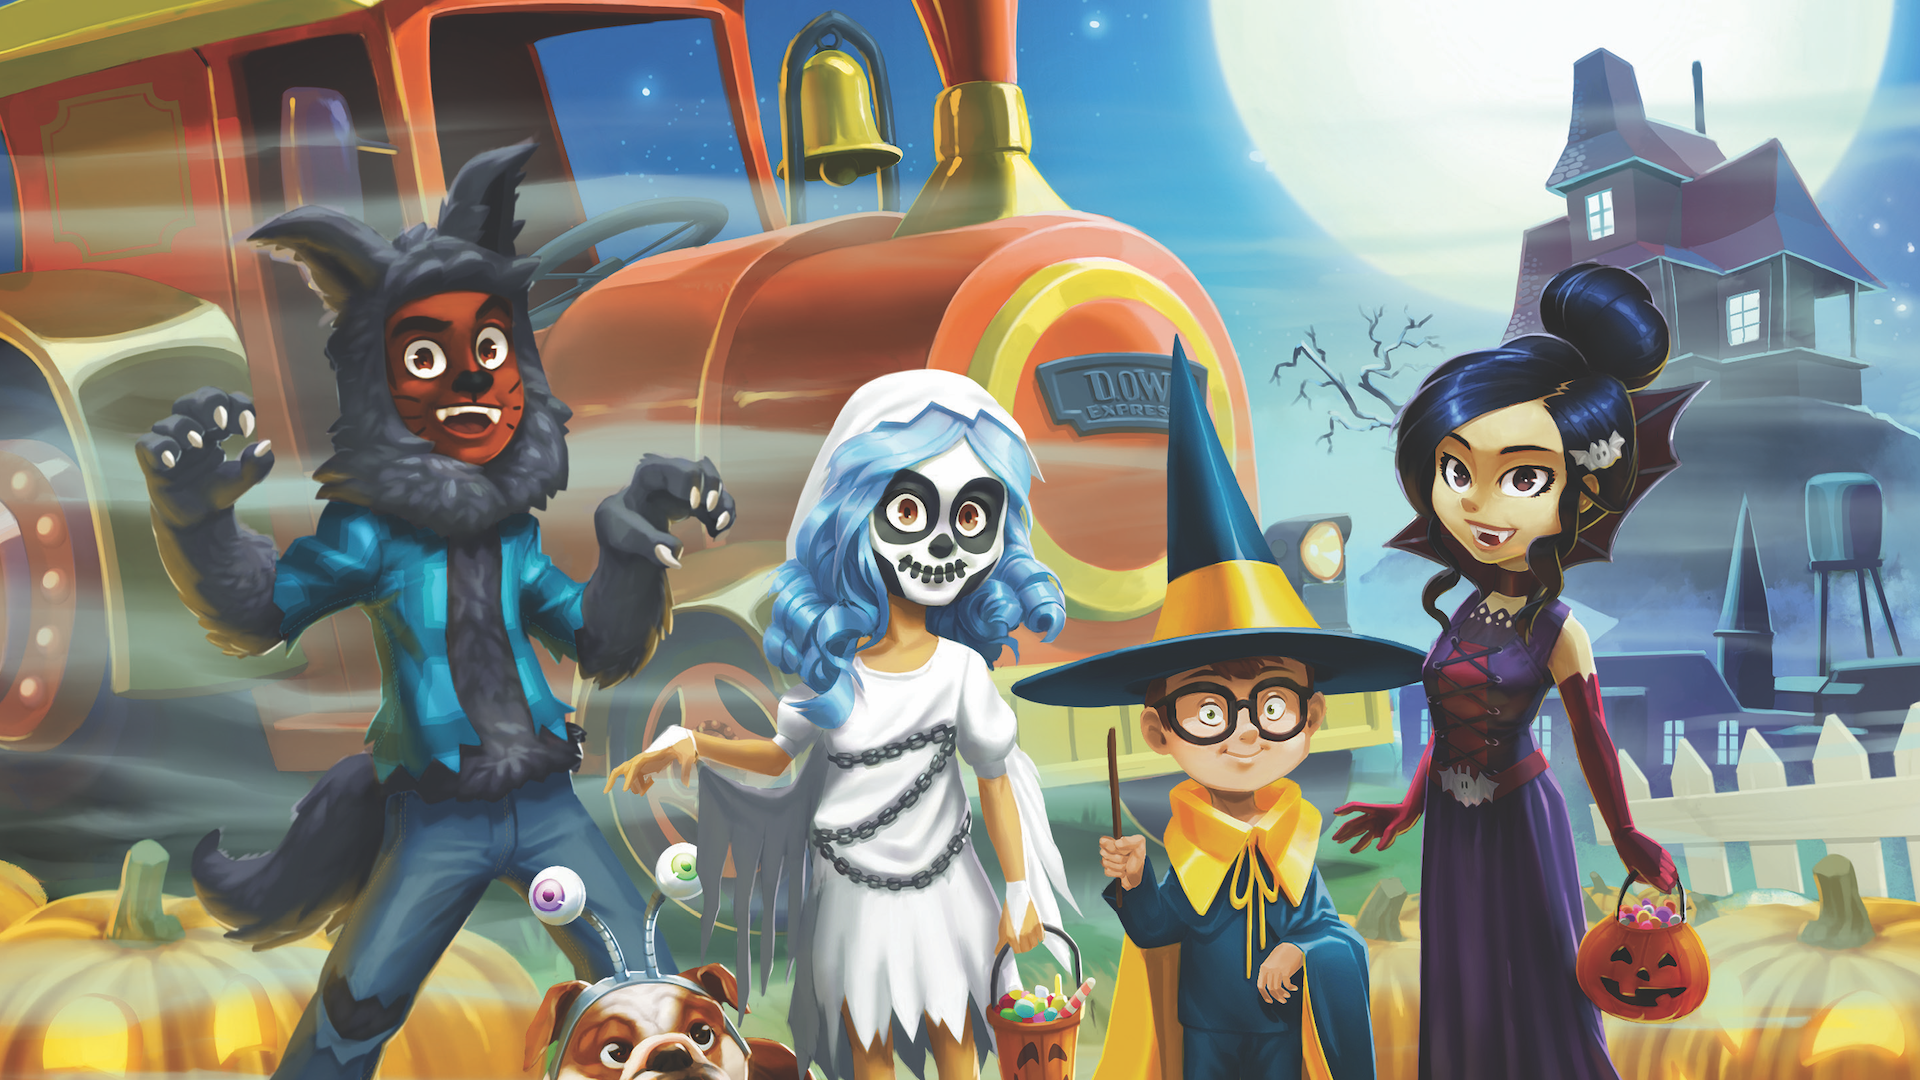 Box art for Ticket to Ride: Ghost Train, featuring a group of youngsters in monster costumes as they prepare to trick their neighborhood and earn plenty of treats.